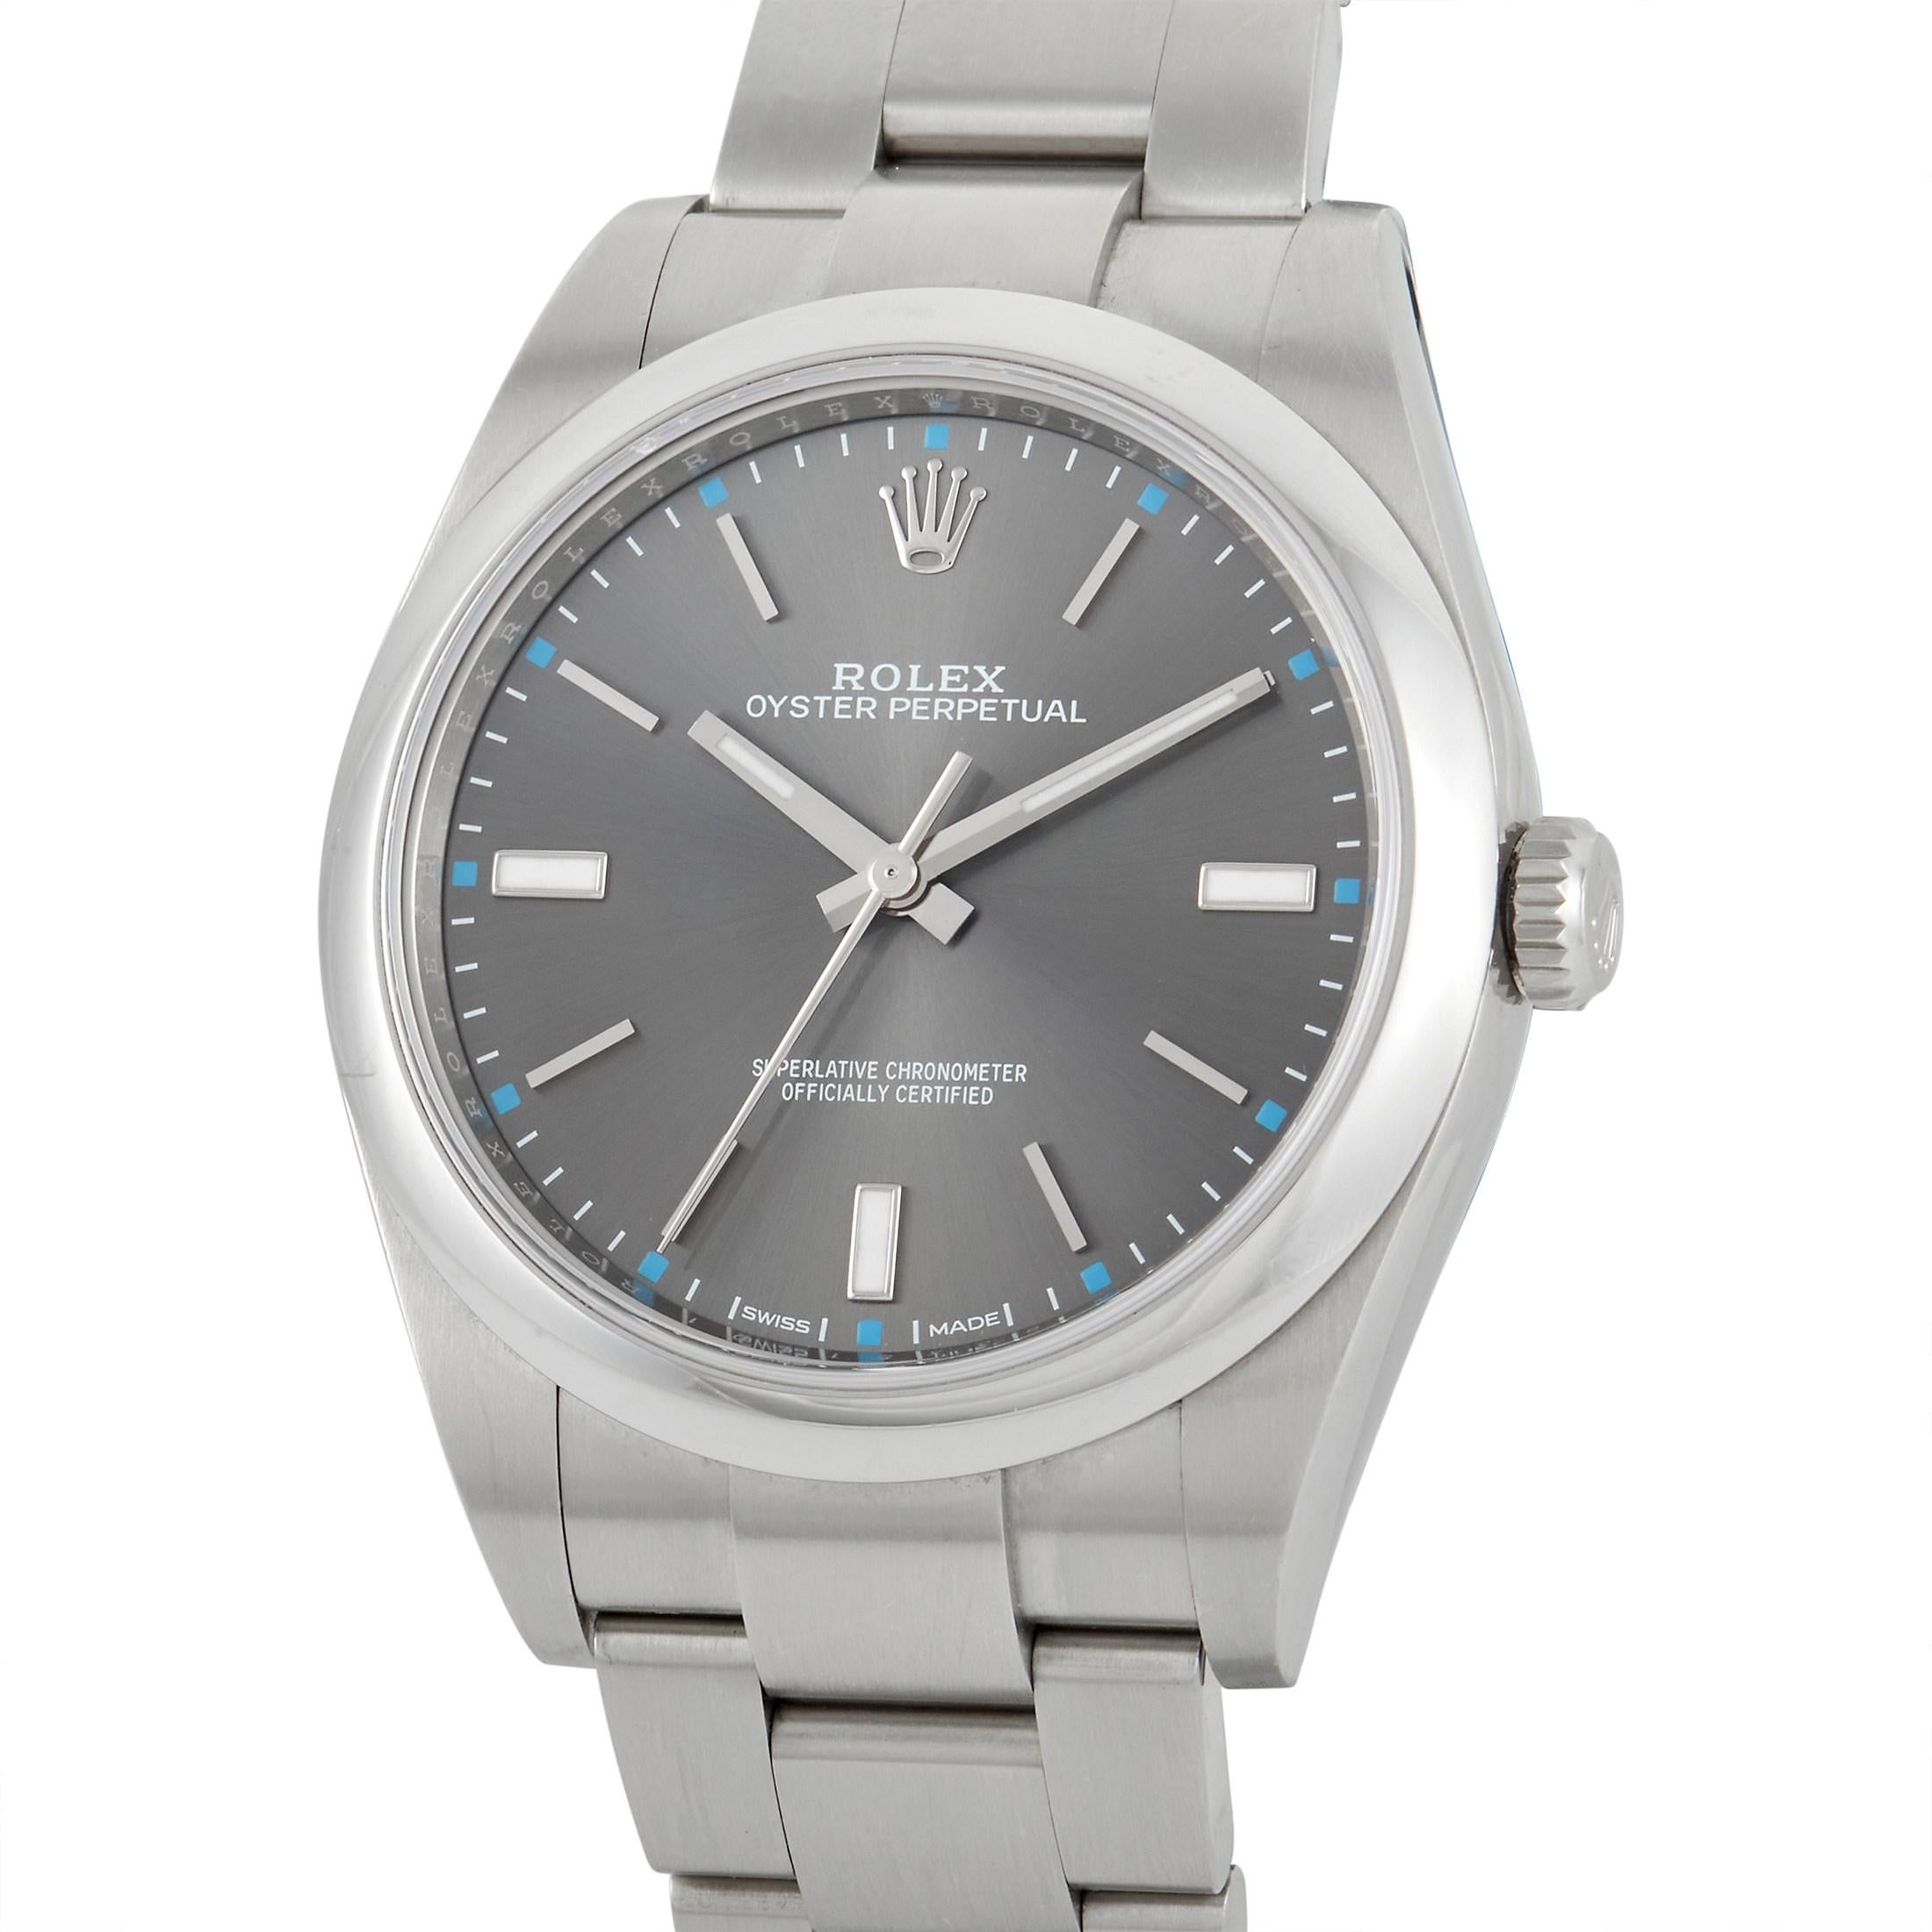 The Rolex Oyster Perpetual 39 Dark Rhodium Dial Watch 114300-0001 could well be the only watch you'll ever need. It has a timeless style and a reliable performance. The simple yet attractive dark rhodium face displays a conservative metallic grey